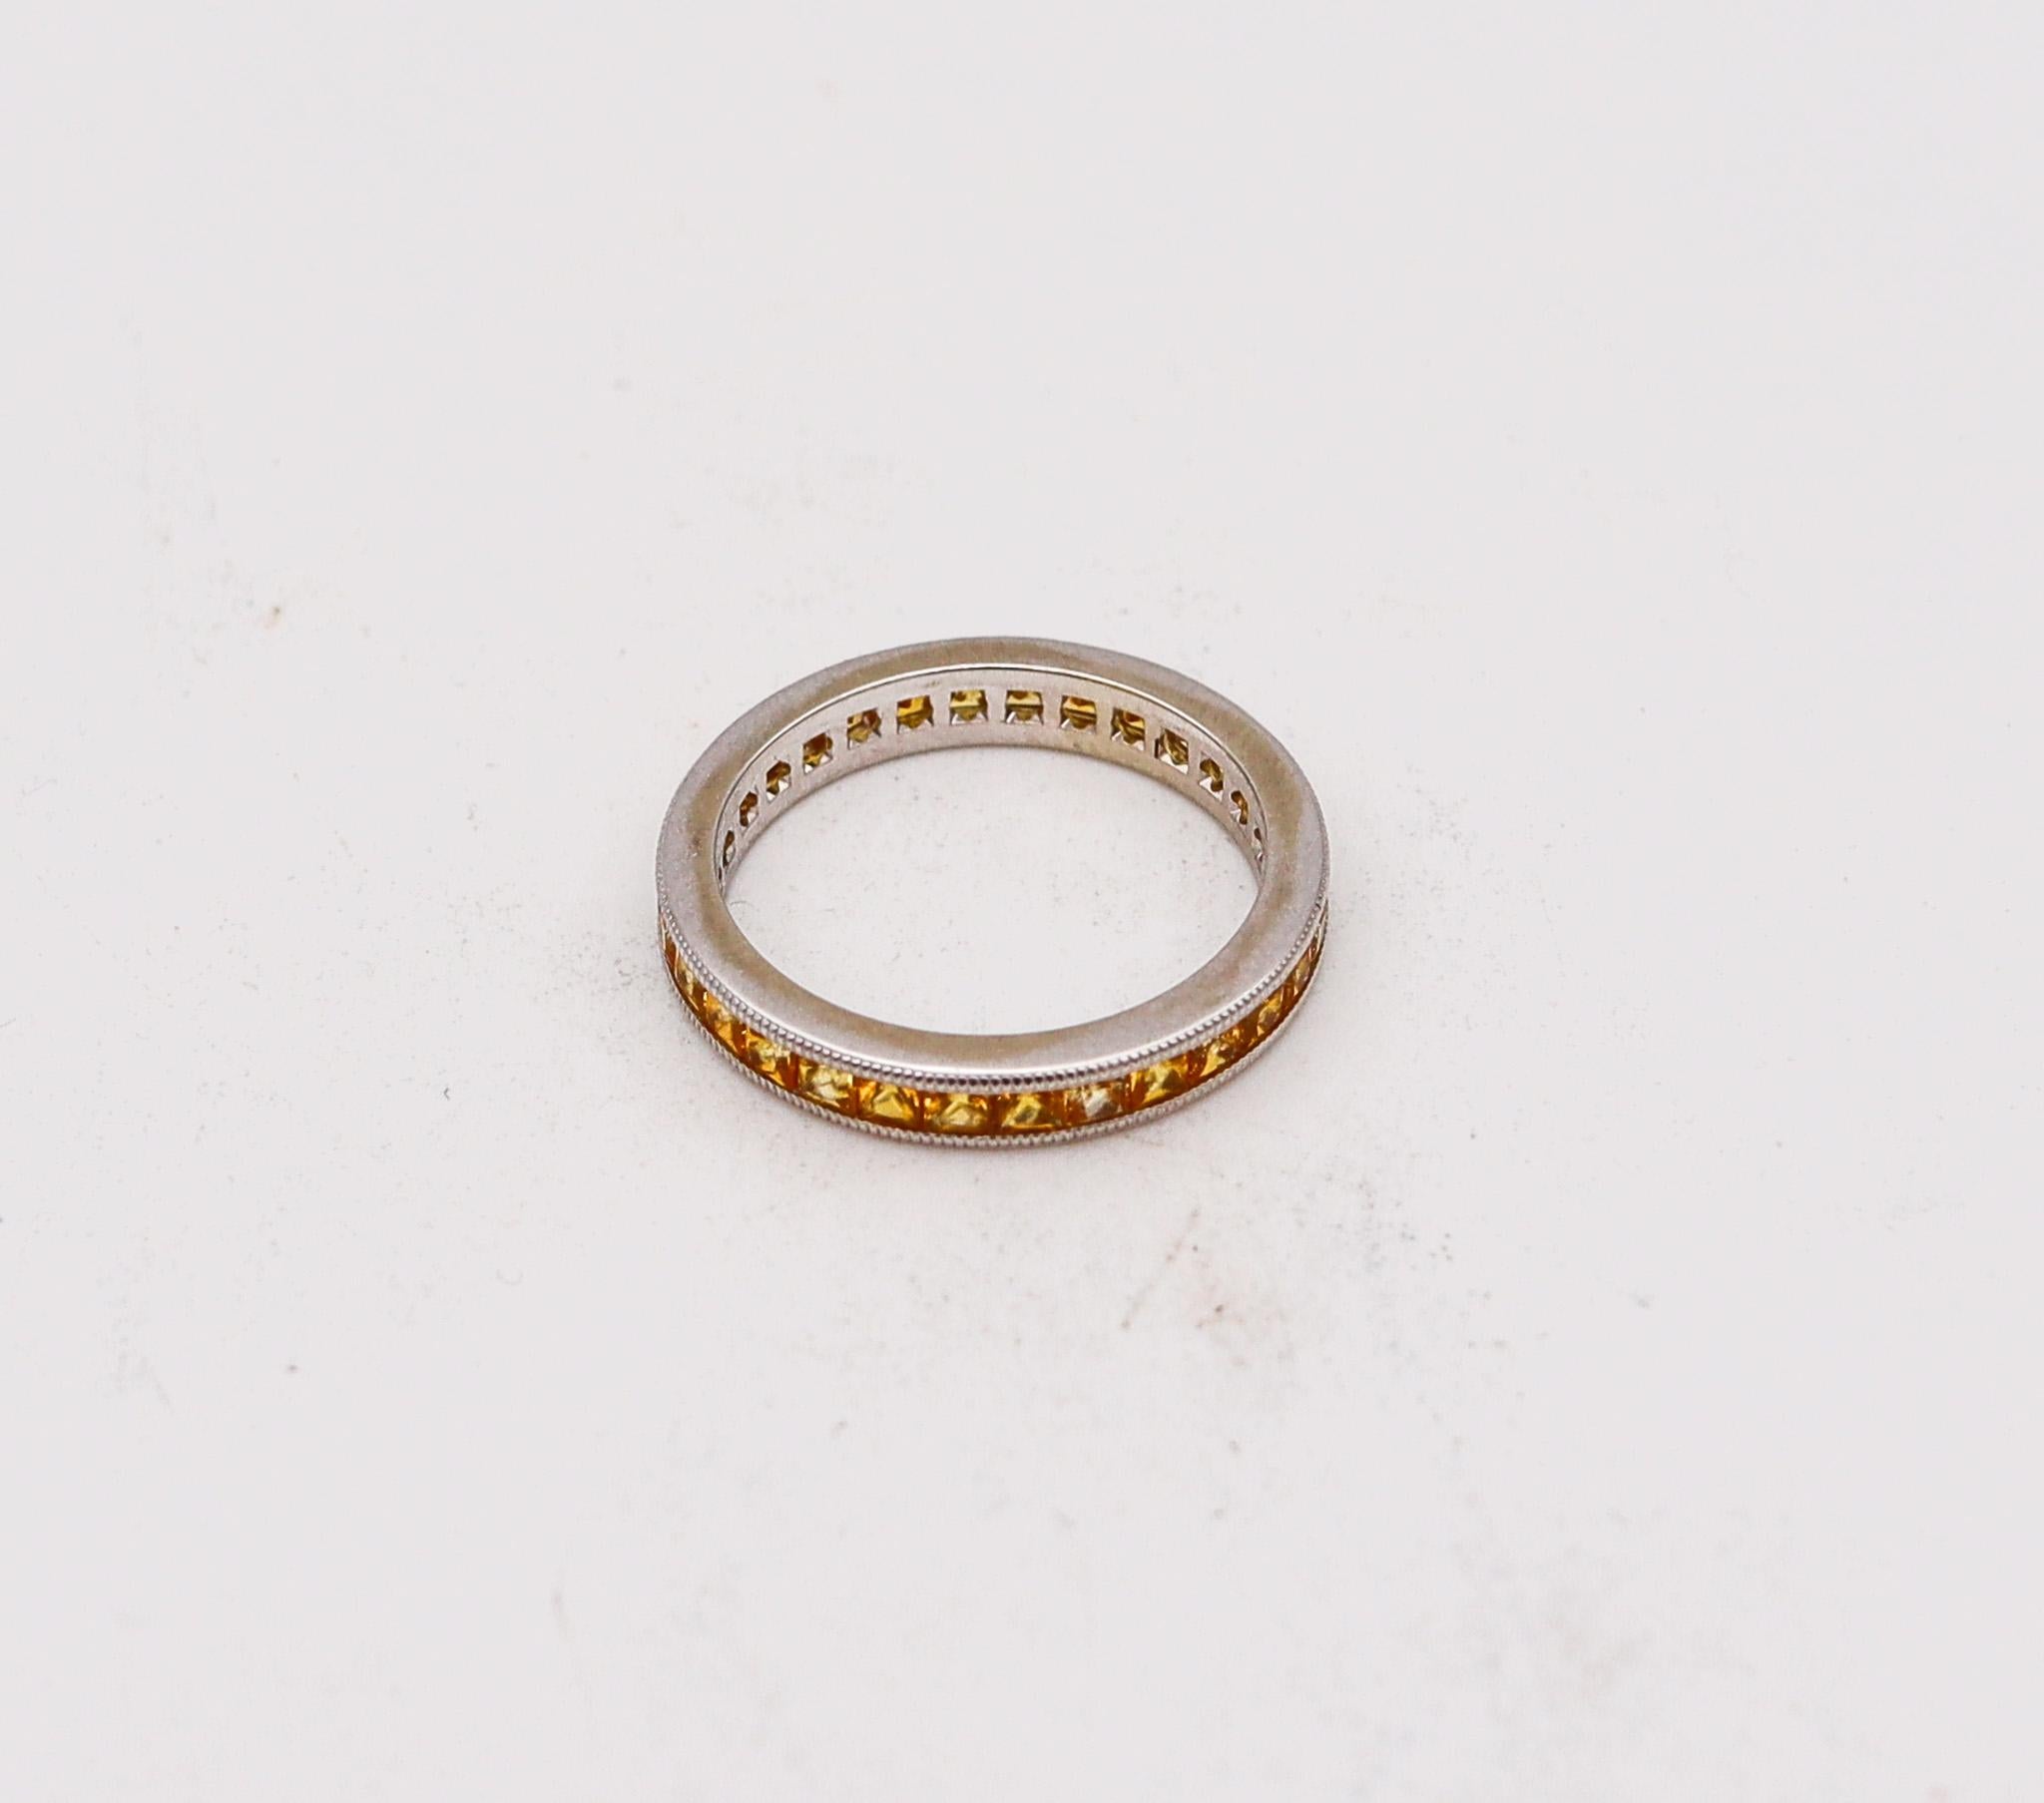 An eternity ring band with Natural Sapphires.

Modern eternity band ring crafted in solid 18 karats white gold, with high polished finish. Is mounted in a channel setting, with 30 calibrated princess cuts of vivid yellow sapphires.

Sapphires: The